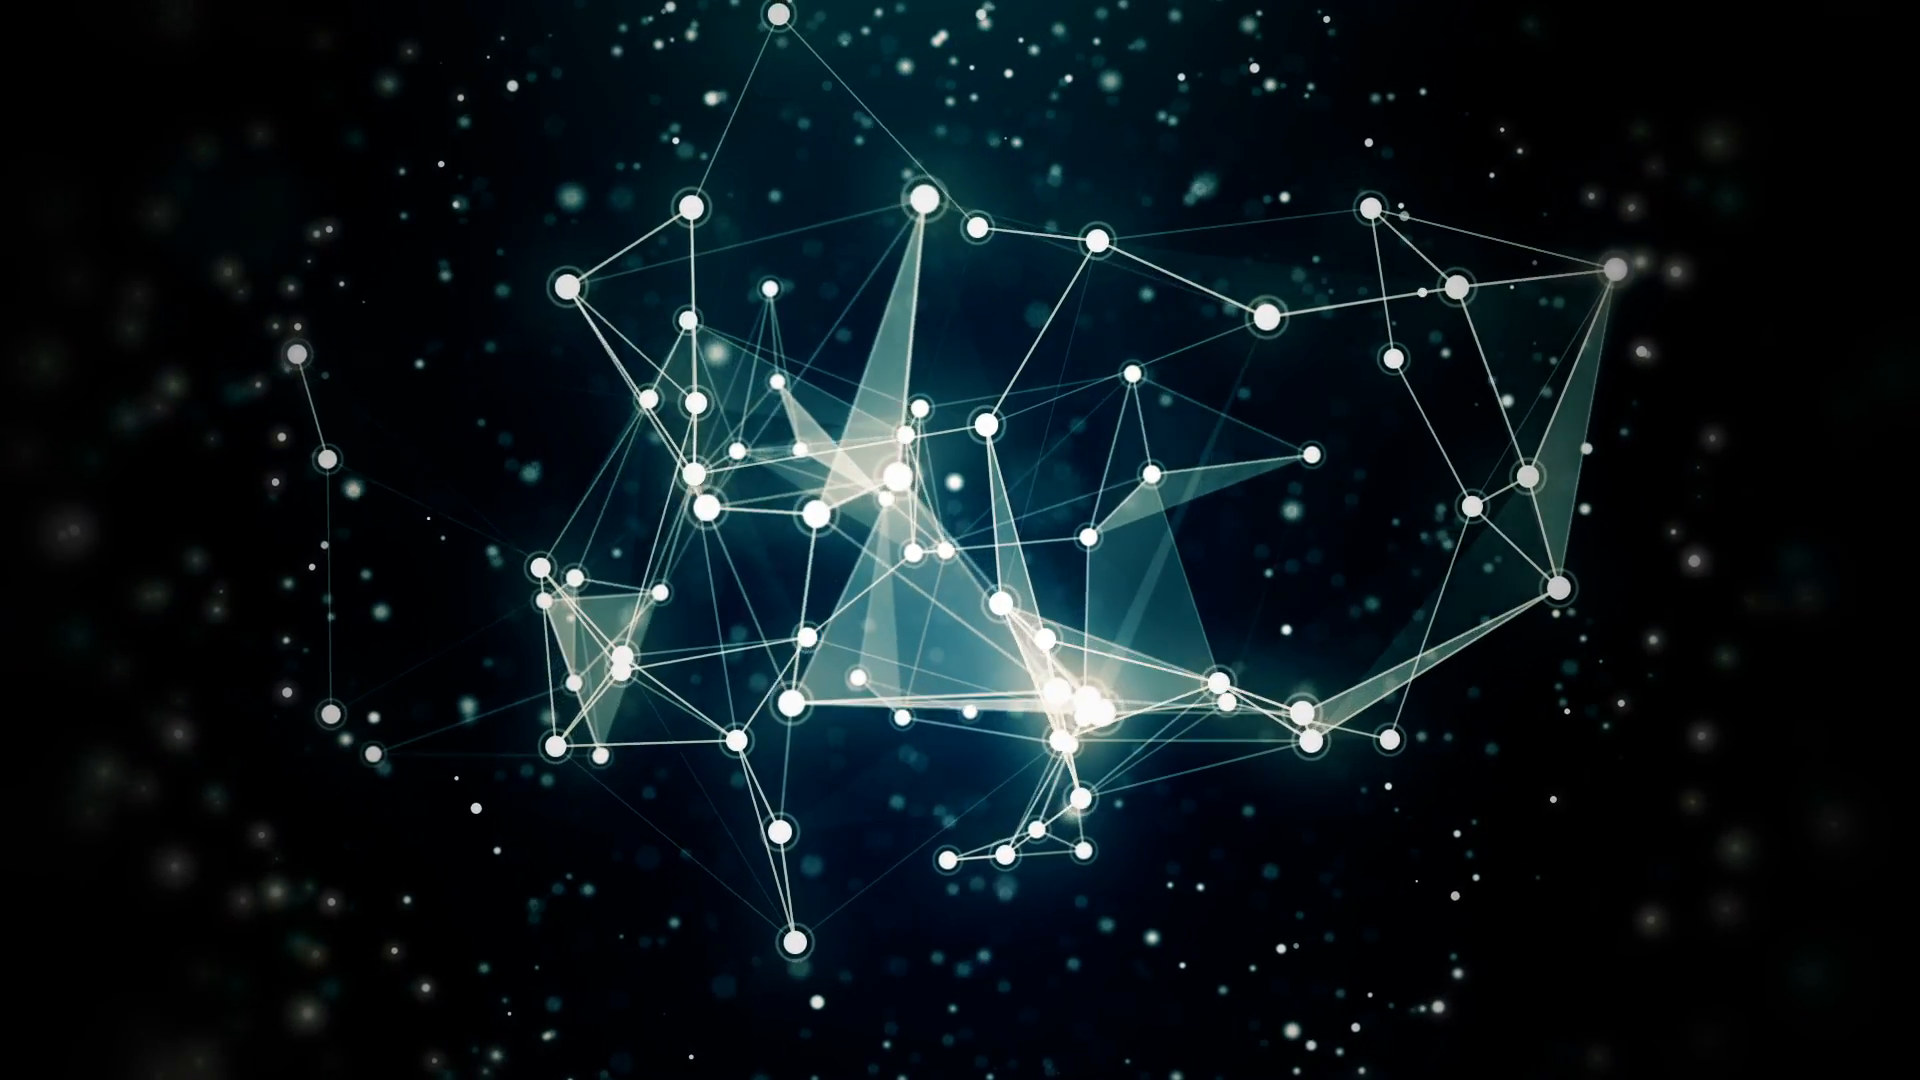 Abstract Stars Constellation in Motion Motion Background - VideoBlocks